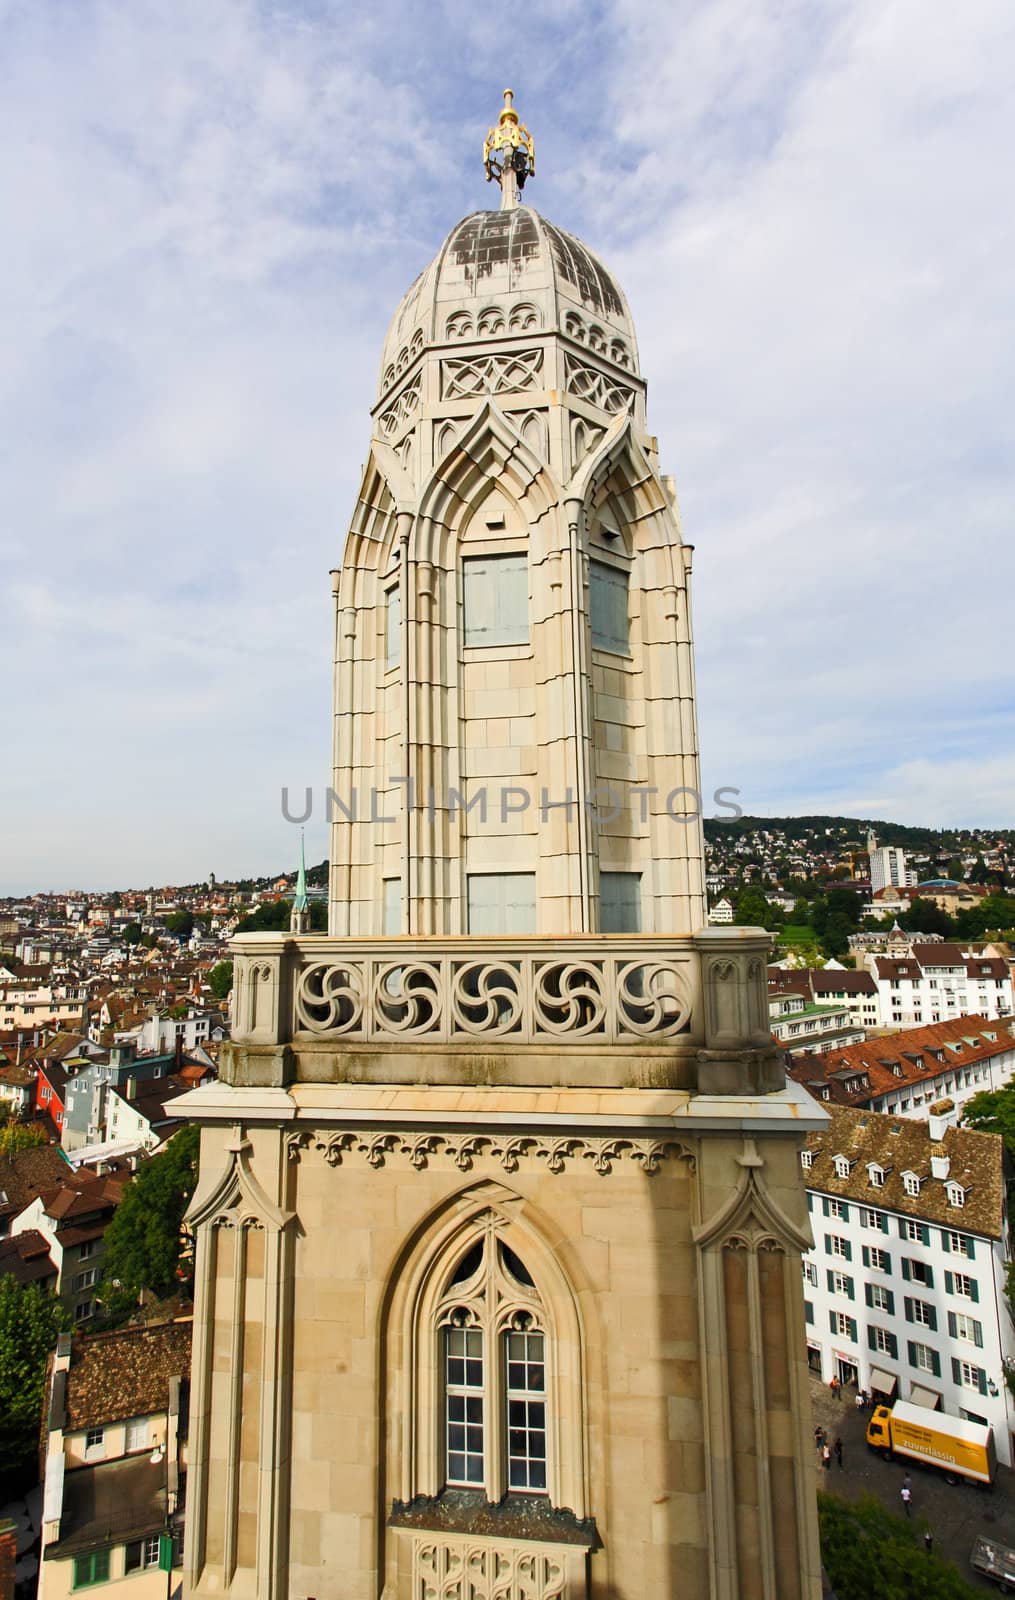 The aerial view of Zurich cityscape from the tower of famous Grossmunster Cathedral 